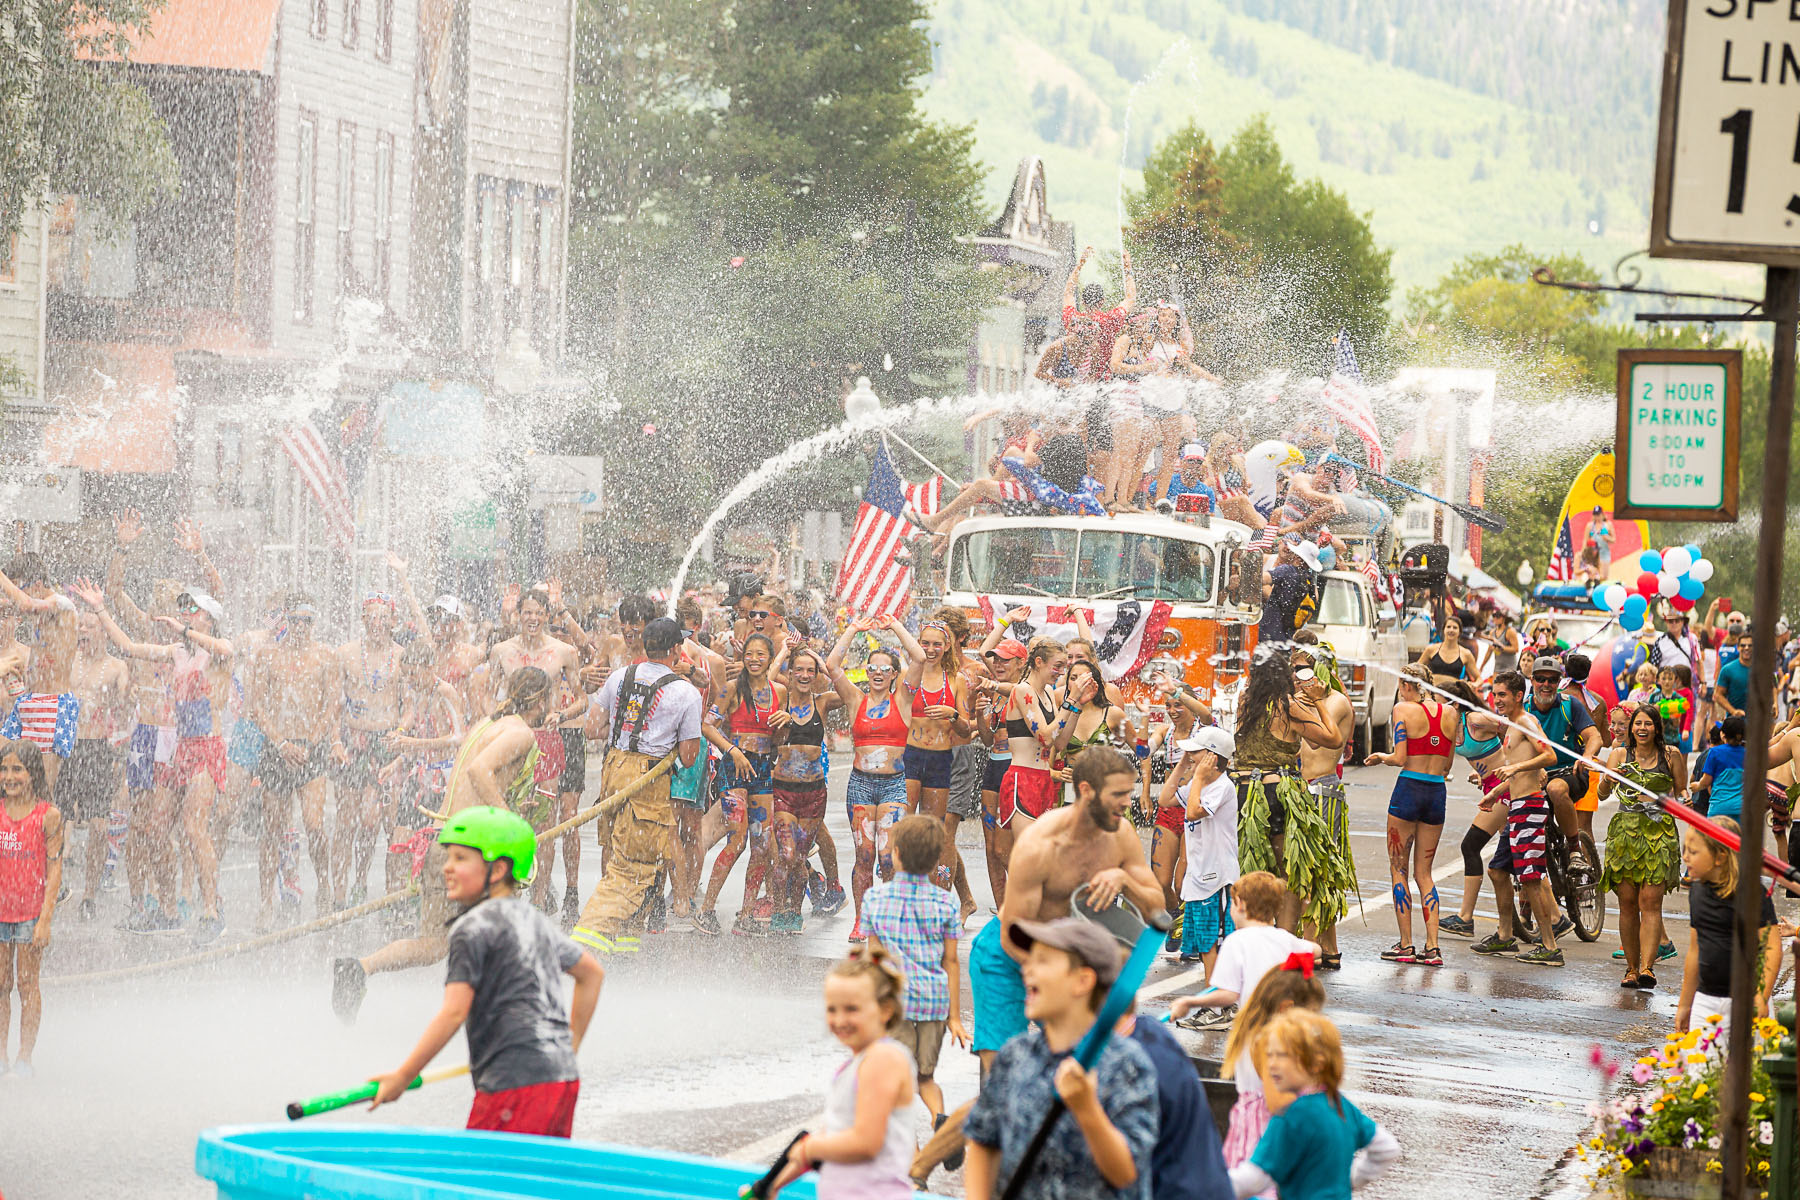 It's "Game On" as the water starts flying at the Crested Butte 4th of July Parade.